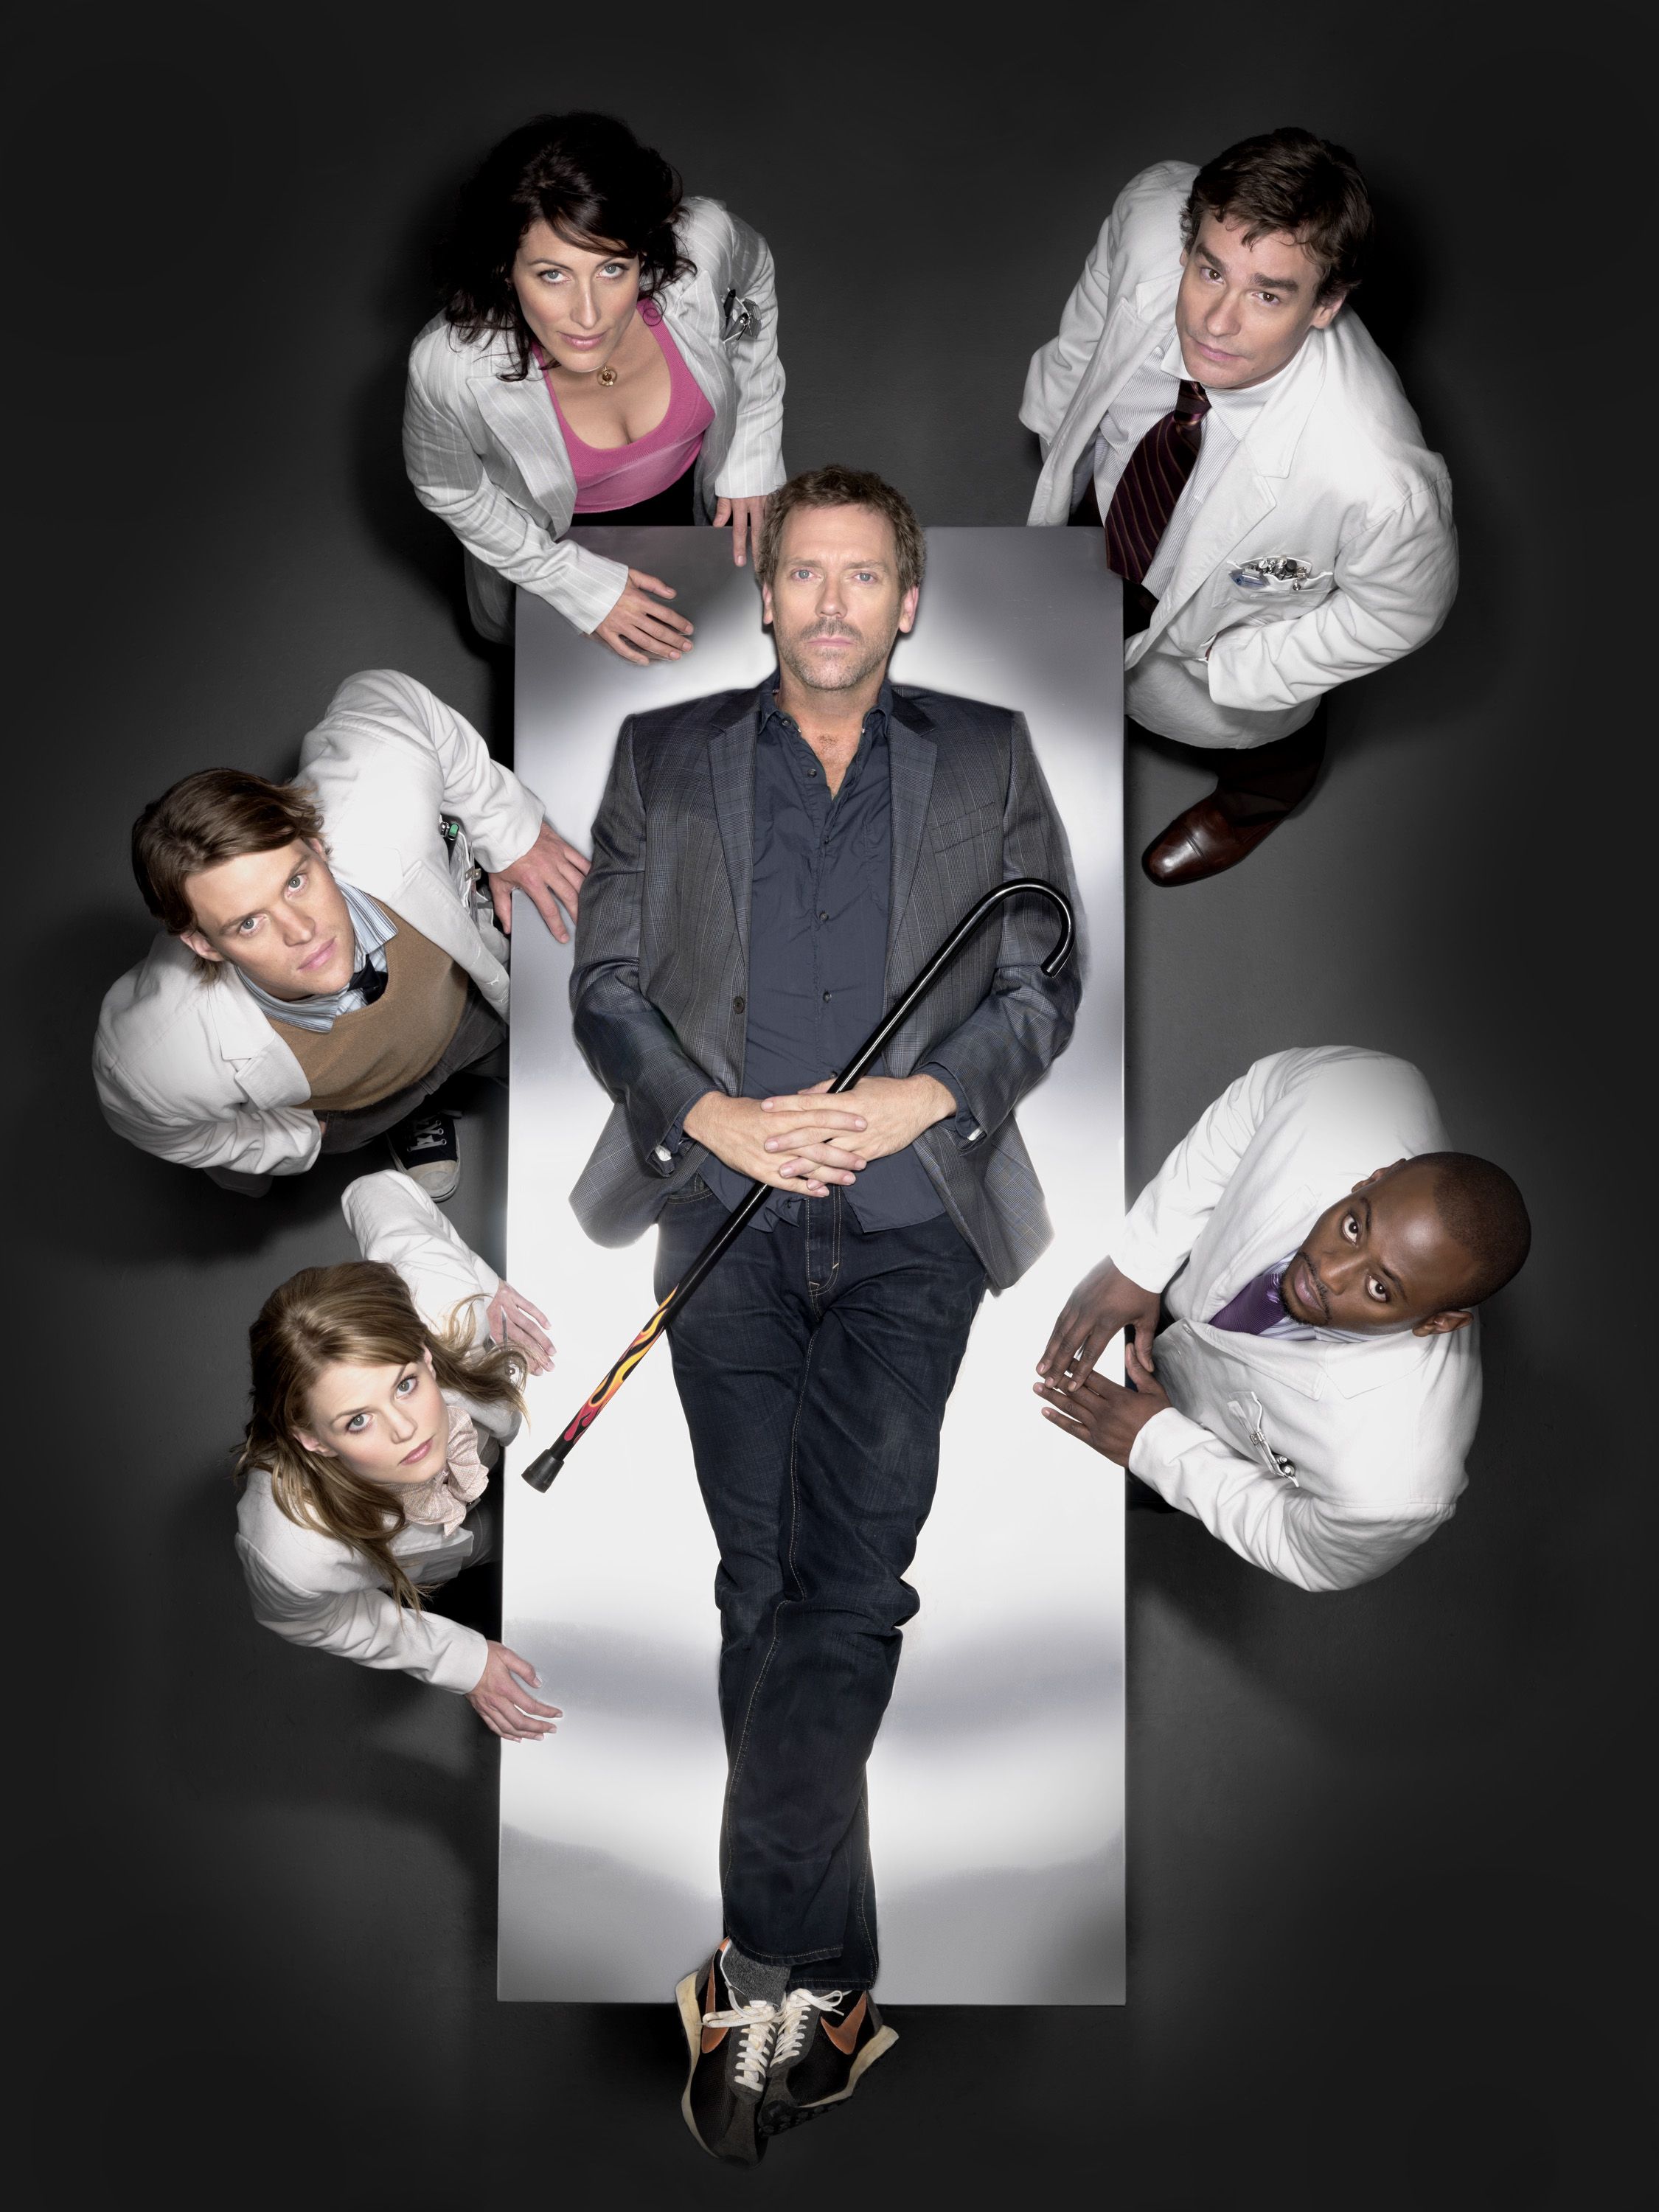 25 Things You Didn't Know About House - House TV Show Hugh Laurie